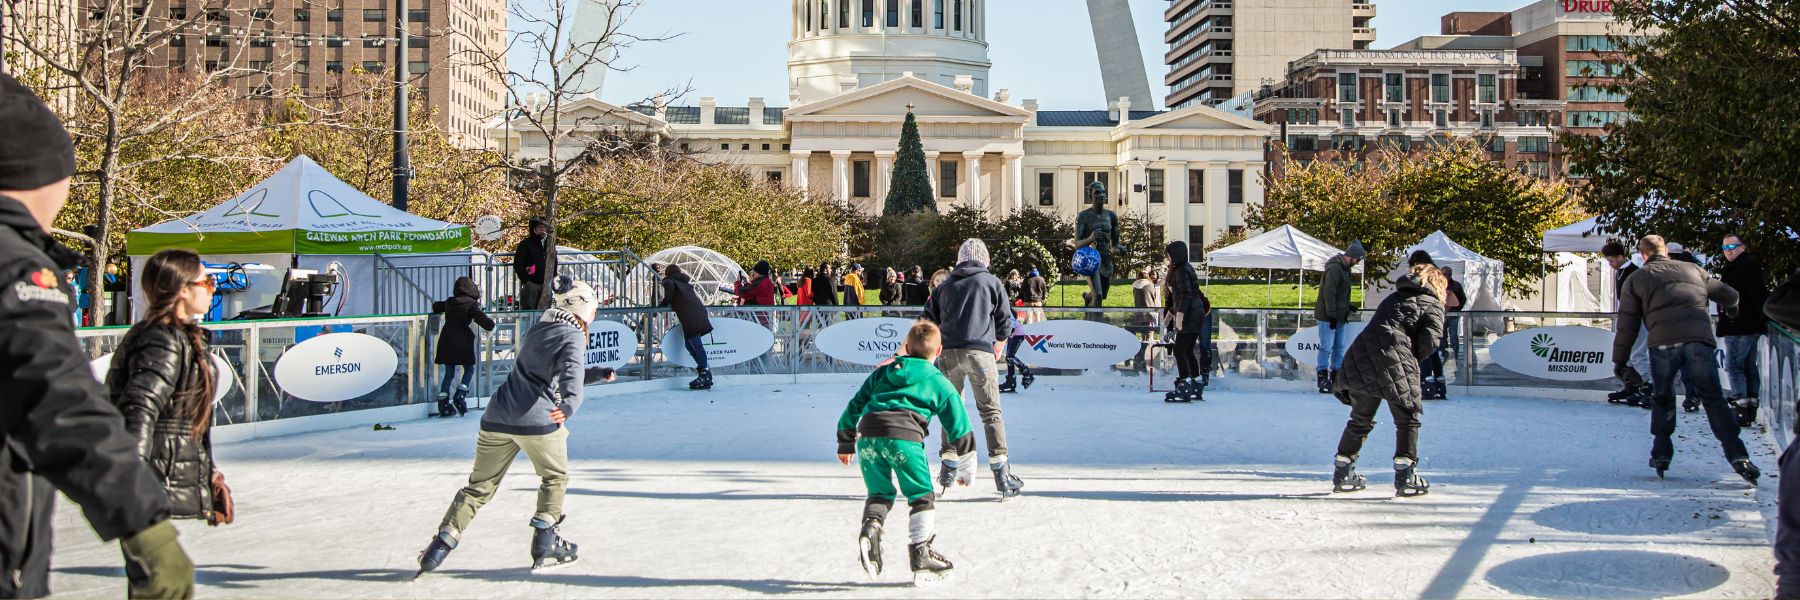 Families skate on the ice rink in downtown St. Louis during Winterfest.